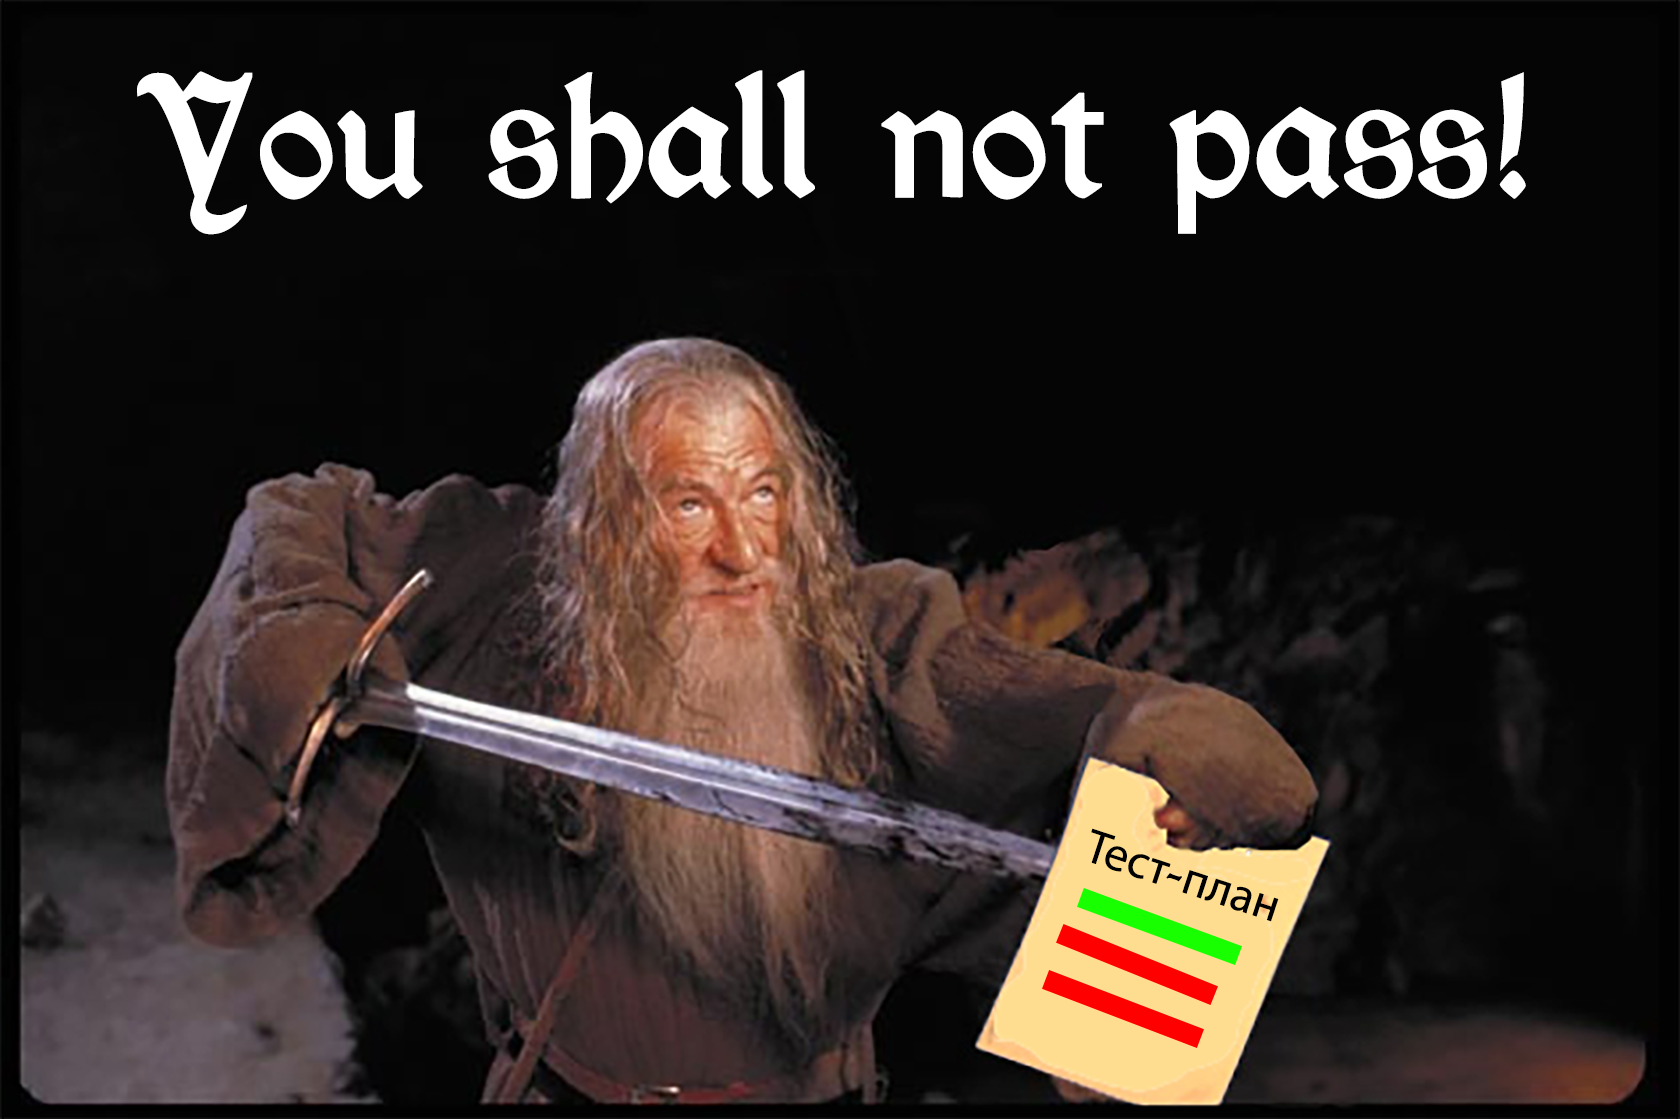 She won t pass the exam. You shall not Pass. Мем you shall not Pass. Гэндальф ю шел нот пасс. Властелин колец you shall not Pass.